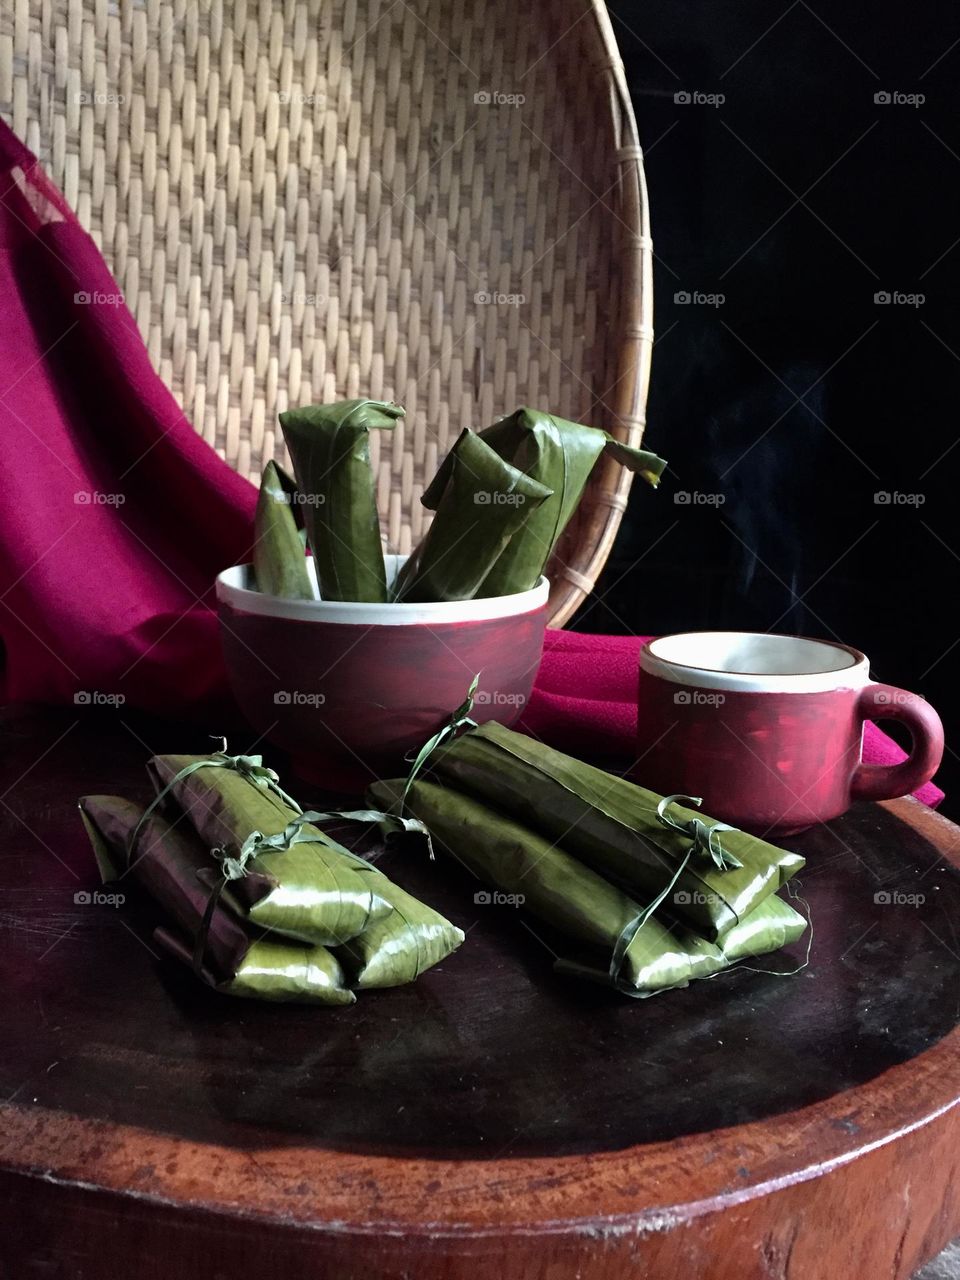 Delicacy ; suman or budbud a glutenous rice cooked with coconut milk 